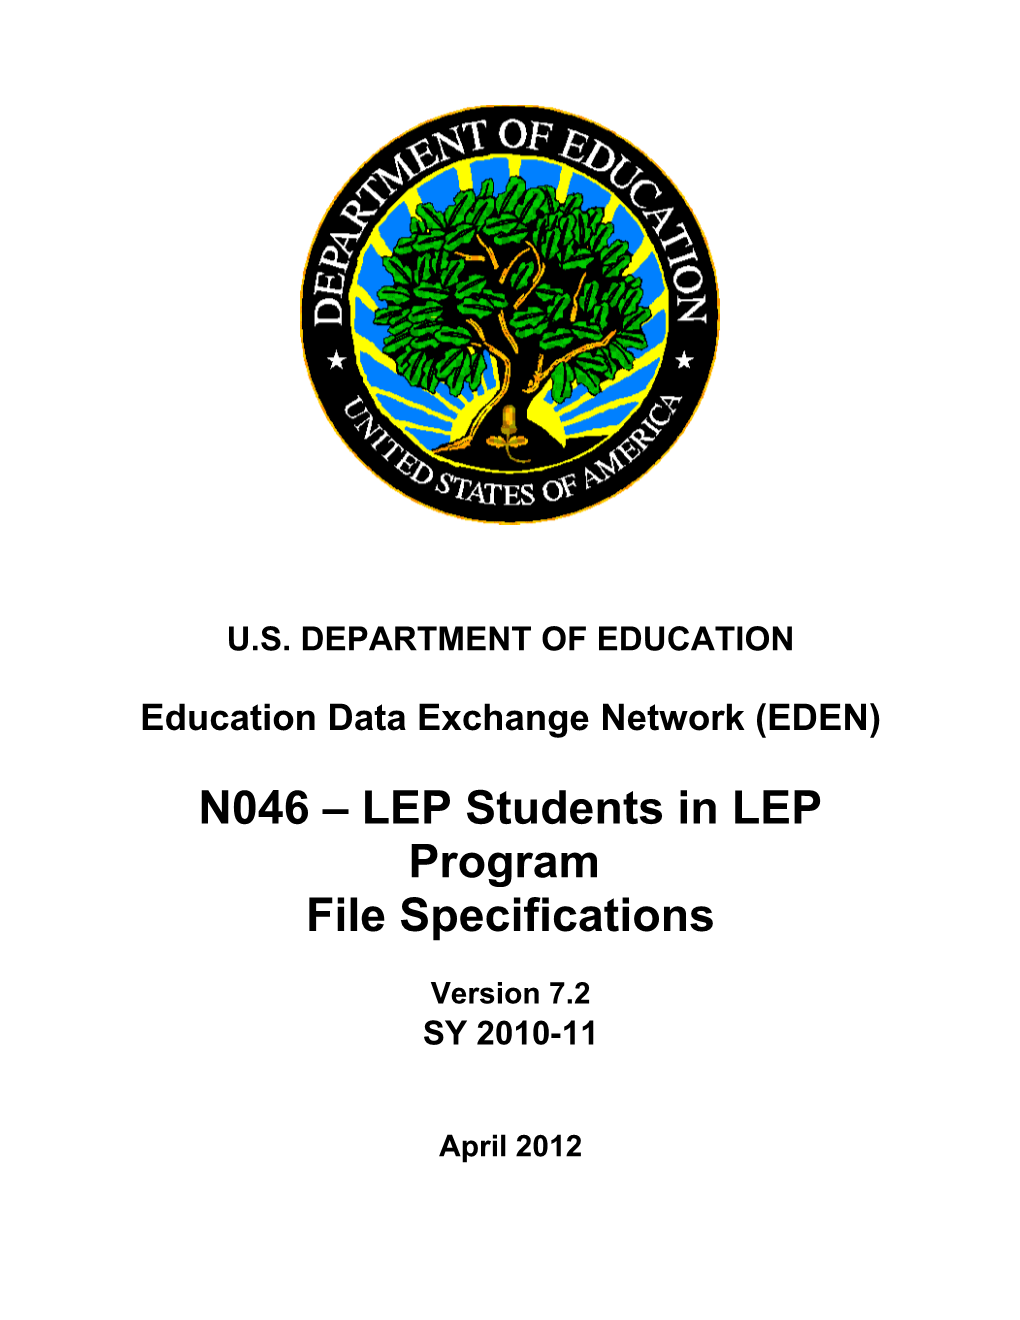 LEP Students in LEP Program File Specifications